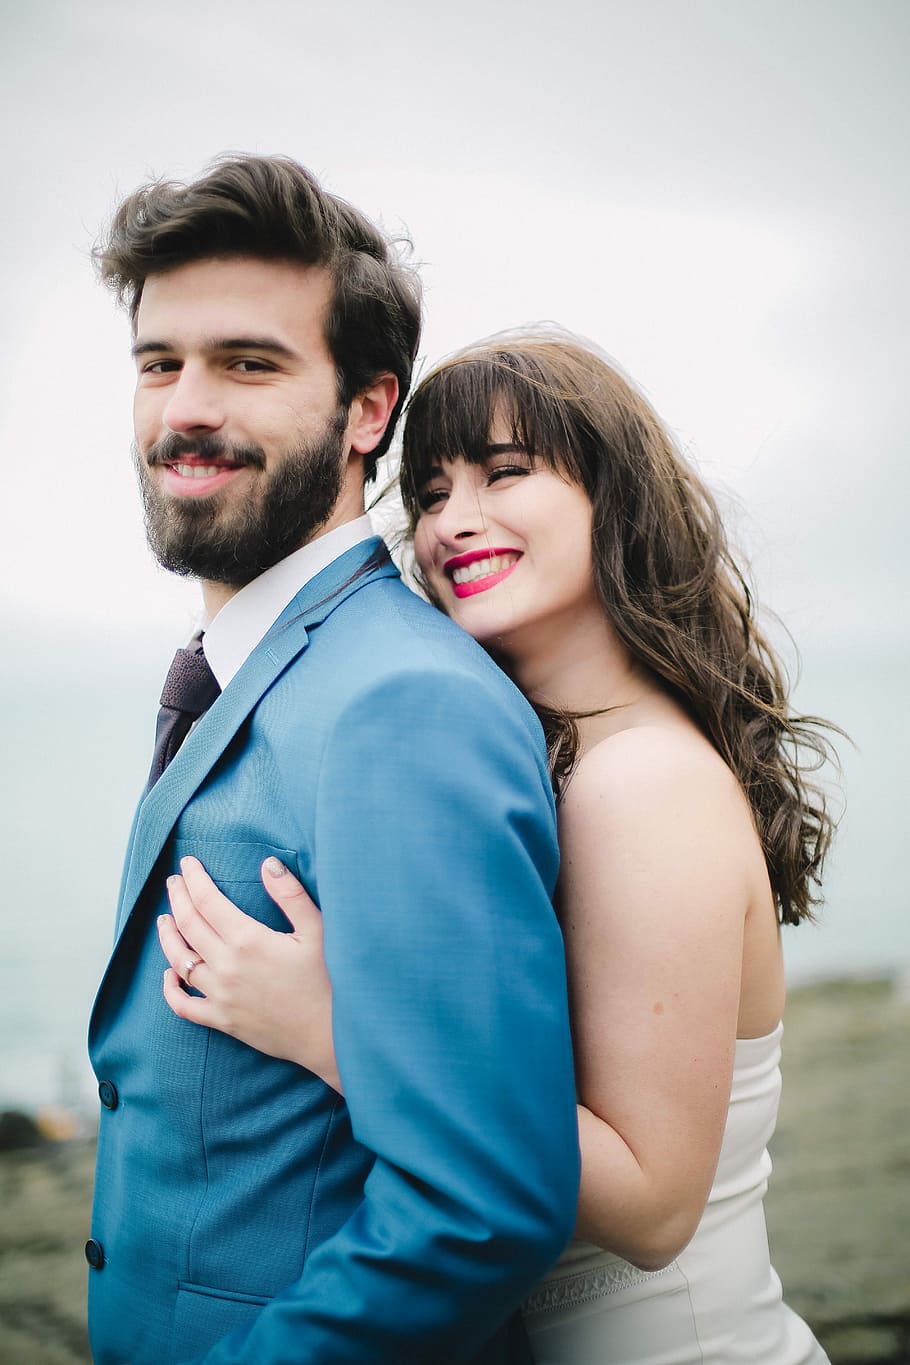 Gül Kurtaran, selective focus photo of groom and bride smiling while standing during daytime